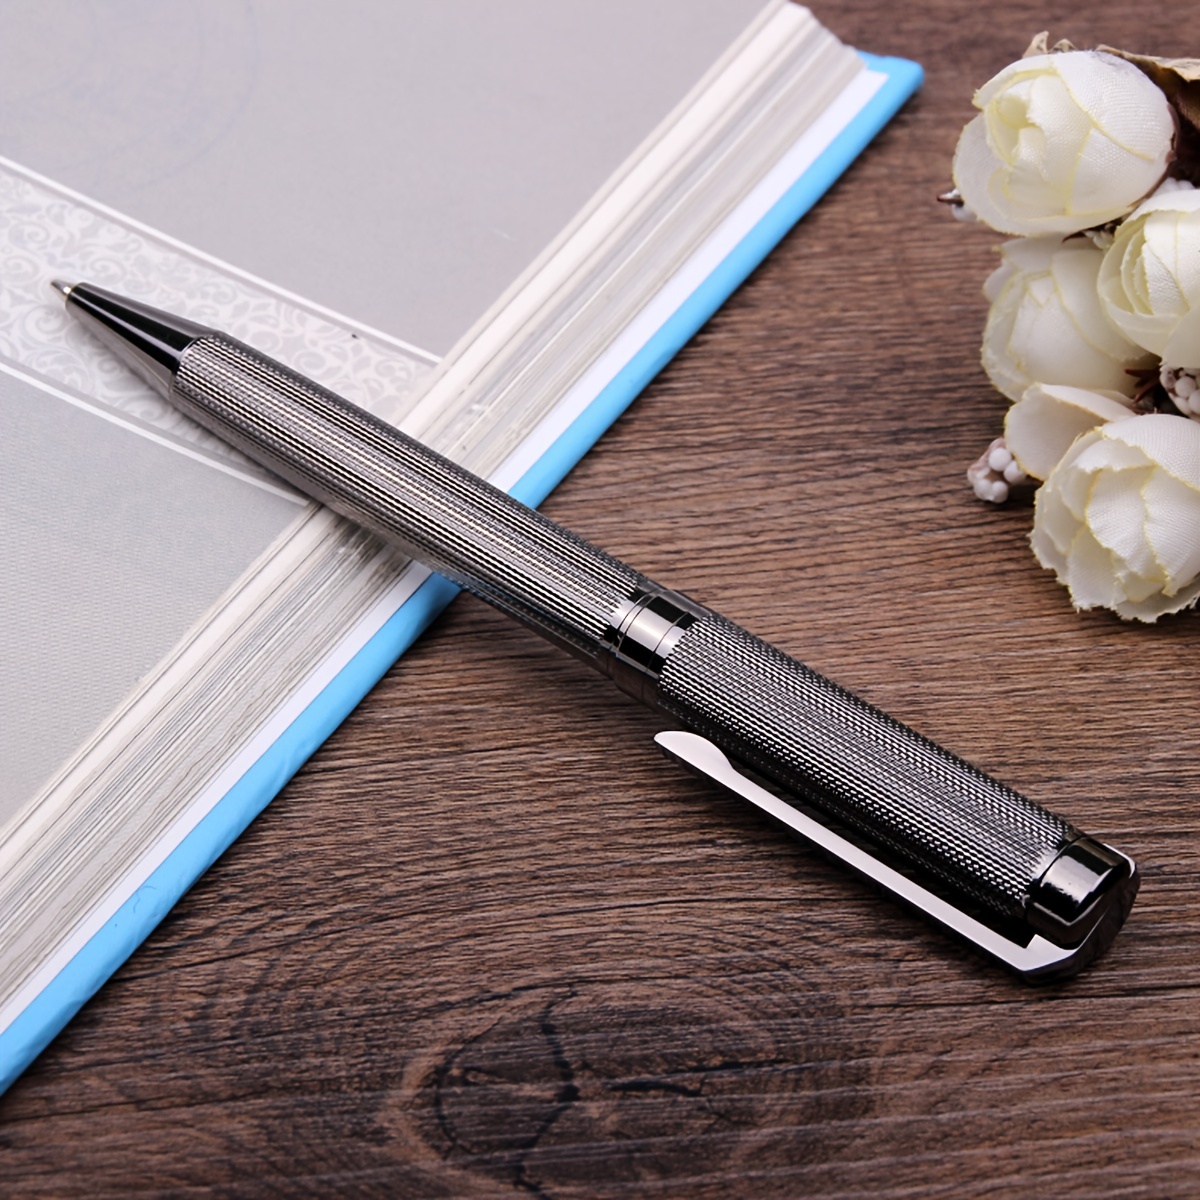 

1pc Ballpoint Pen Stylish Line Engraved Metal Pen Elegant Smooth Writing With 1.0mm Blue Ink Refill Good Gift For Birthday, Friend